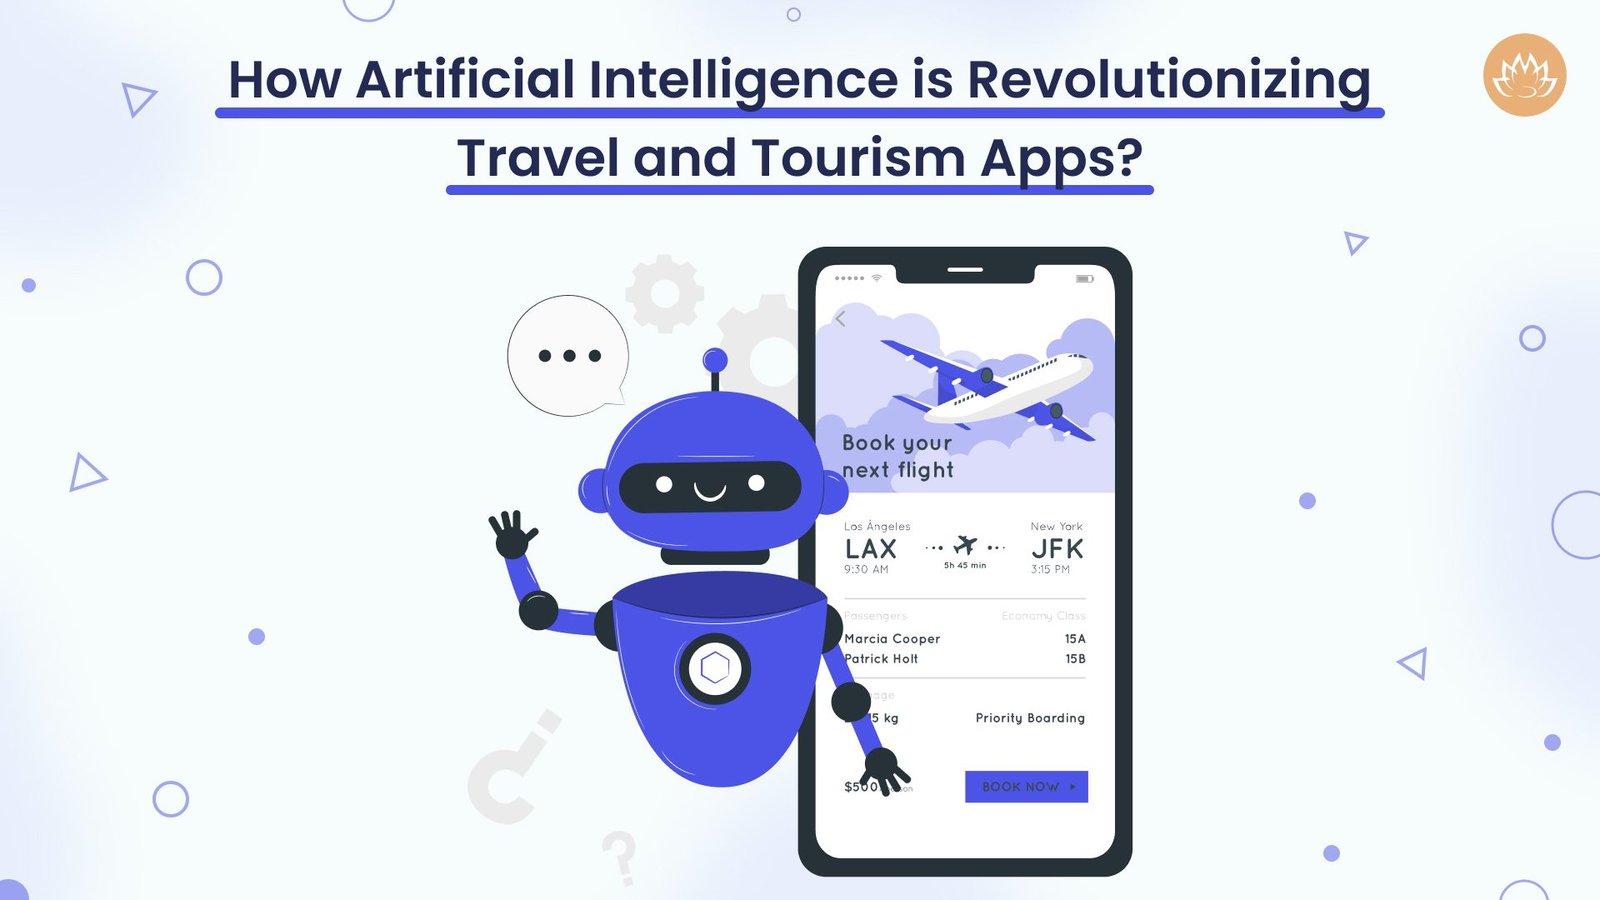 How Artificial Intelligence is Revolutionizing Travel and Tourism Apps